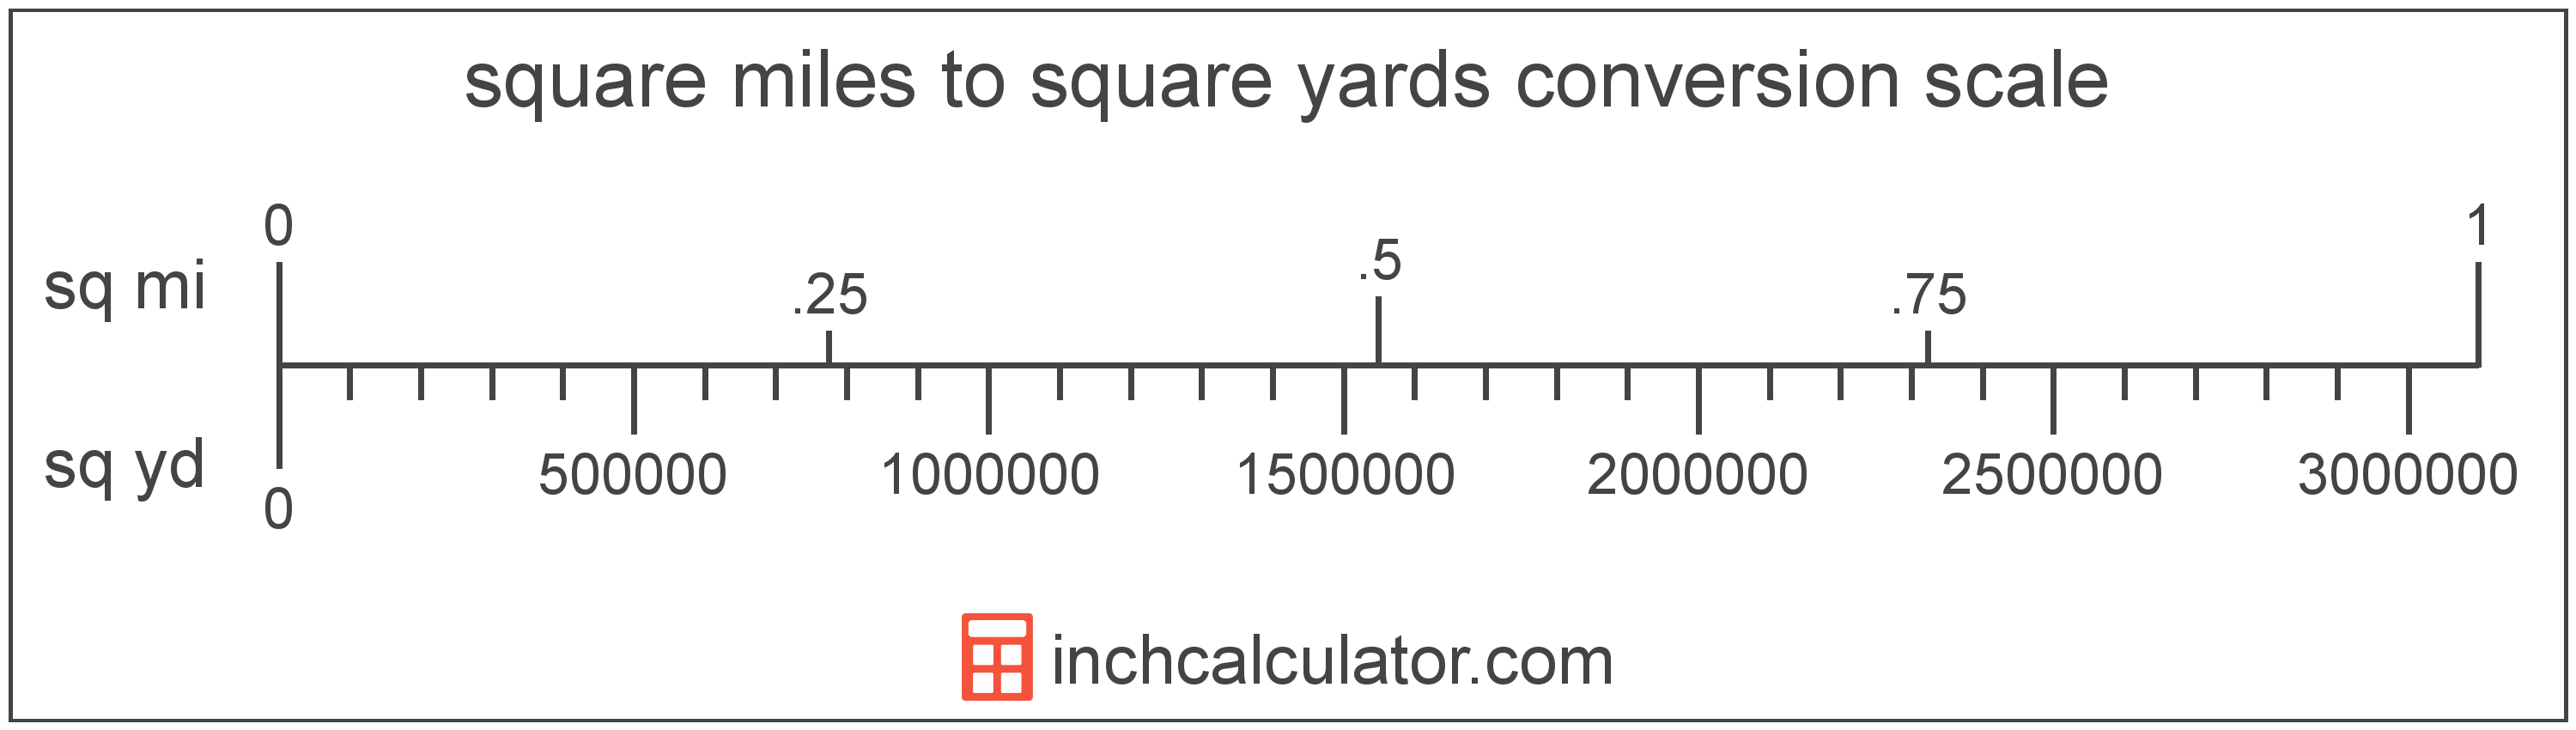 conversion scale showing square miles and equivalent square yards area values